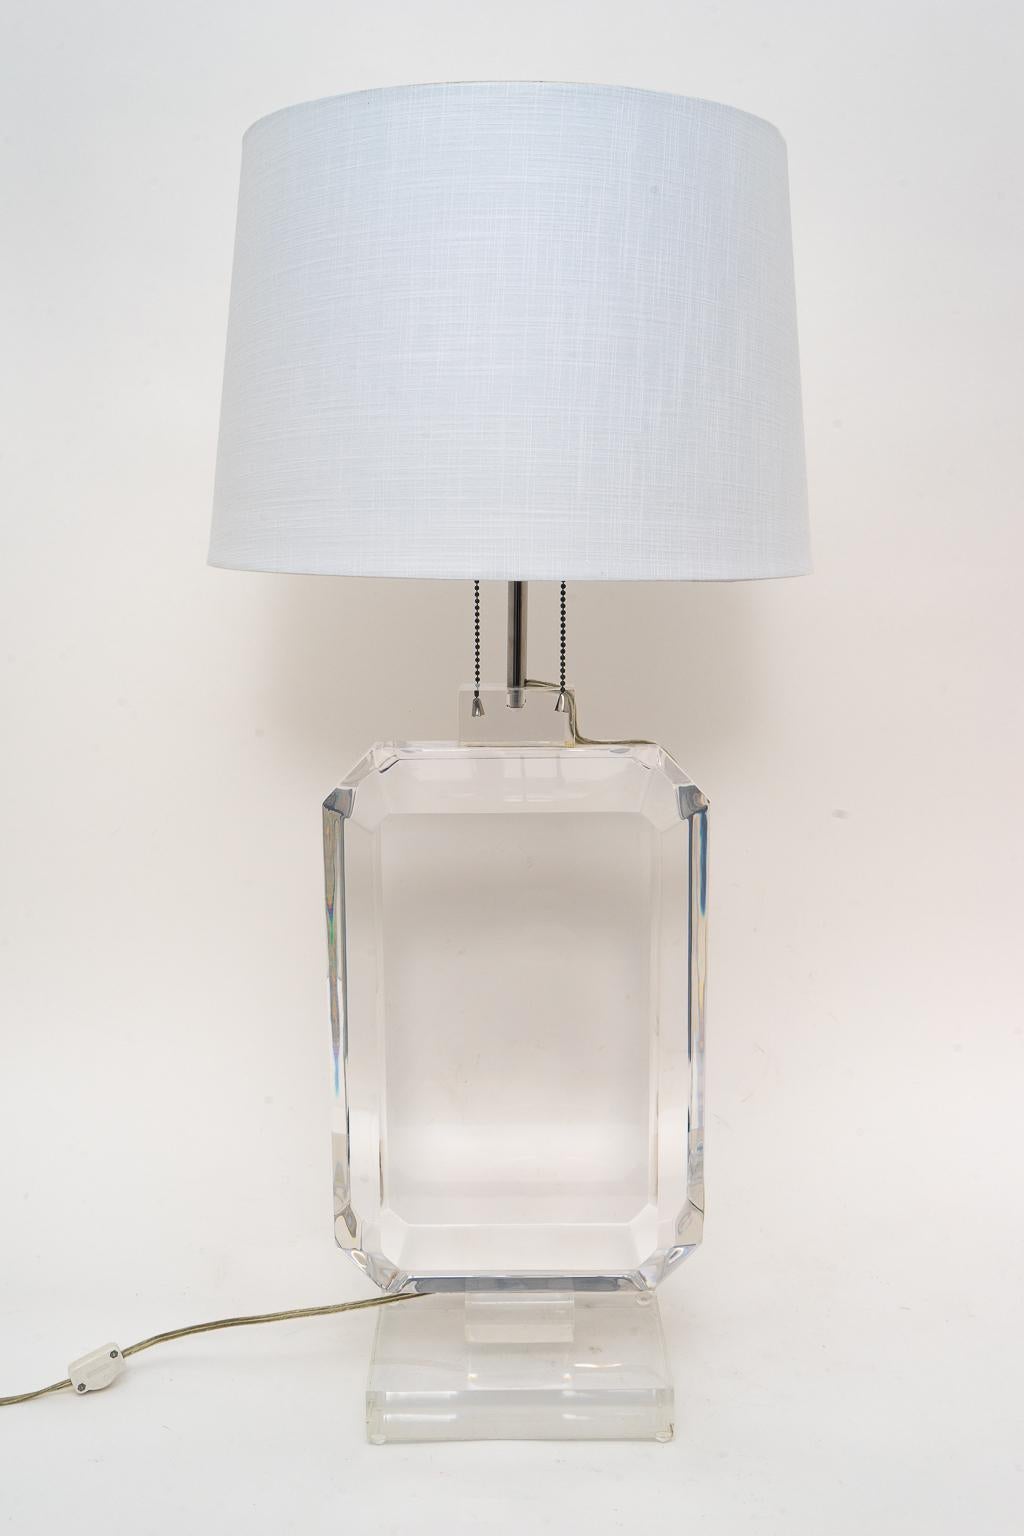 Stunning stylized beveled Lucite table lamp. 

Lamp size is 10 x 6 x 32